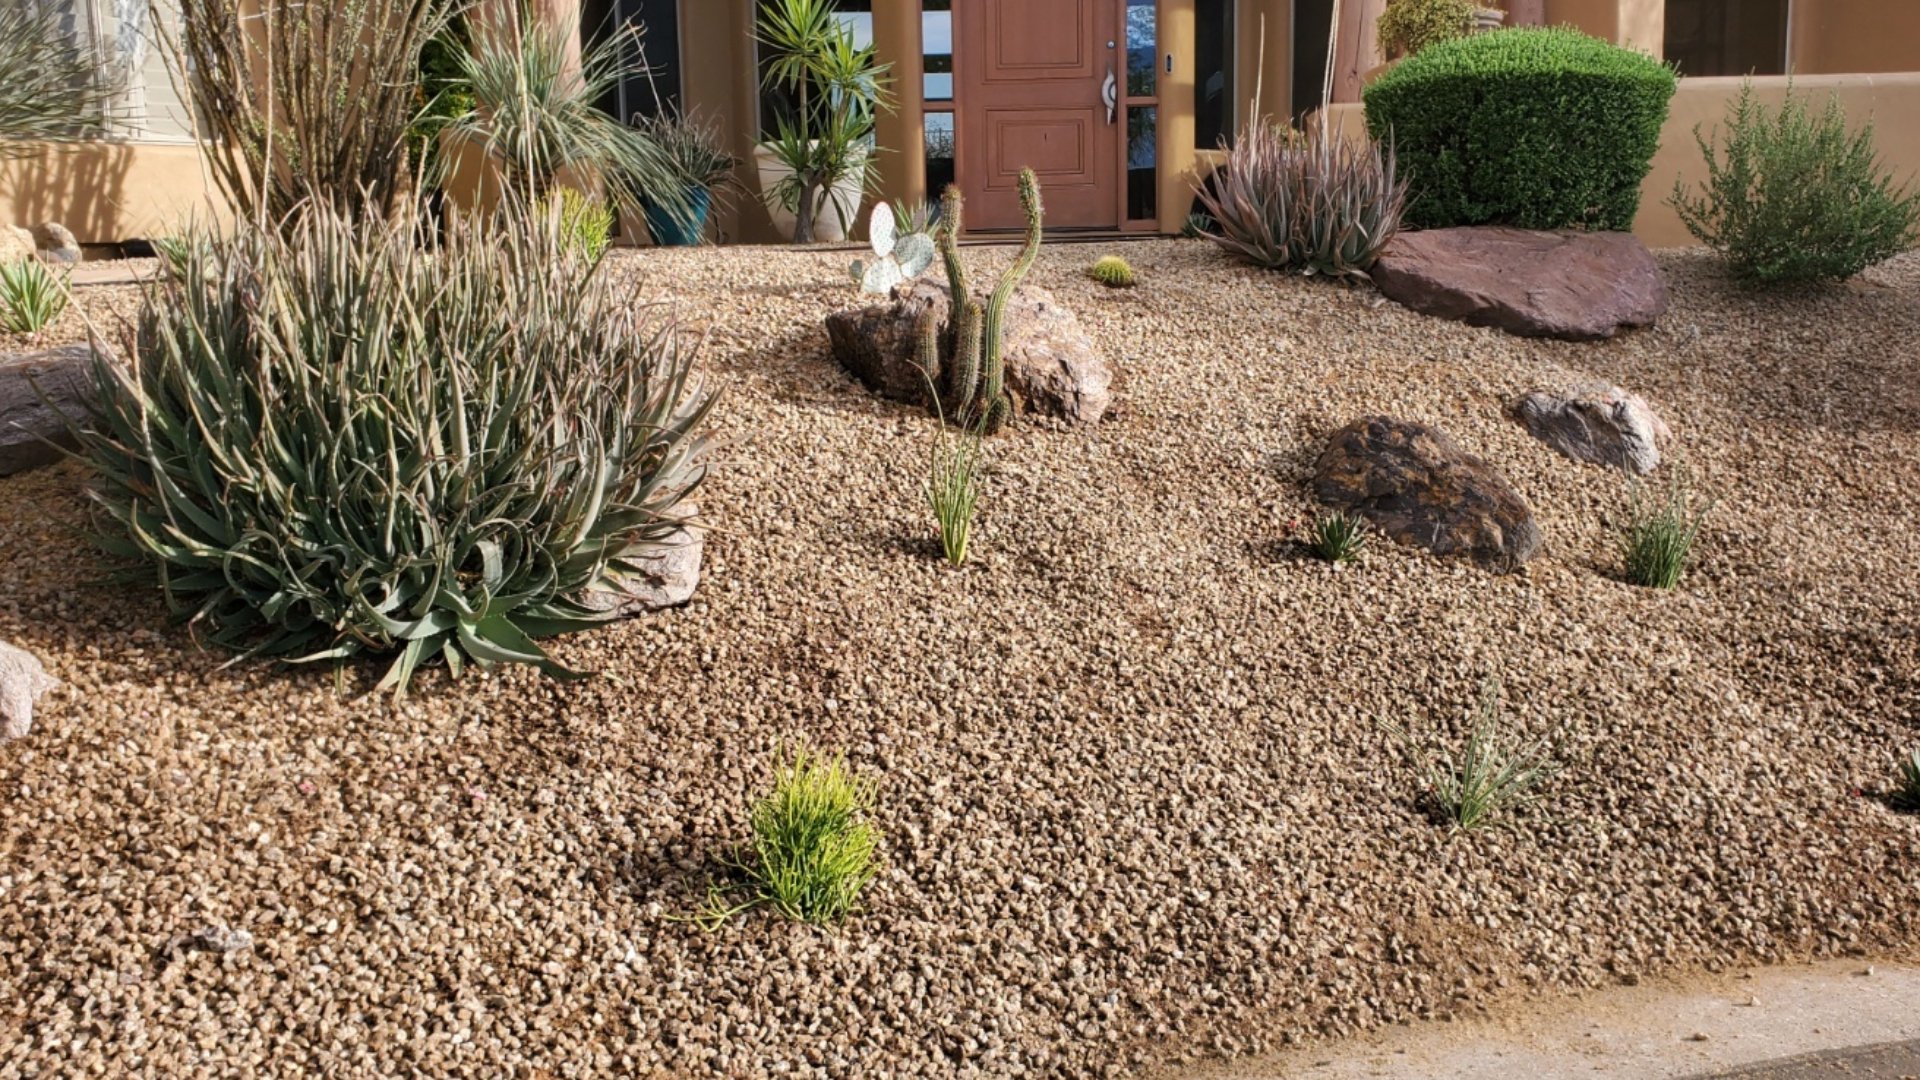 5 Desert Plants You Can Add to Your Garden in Arizona